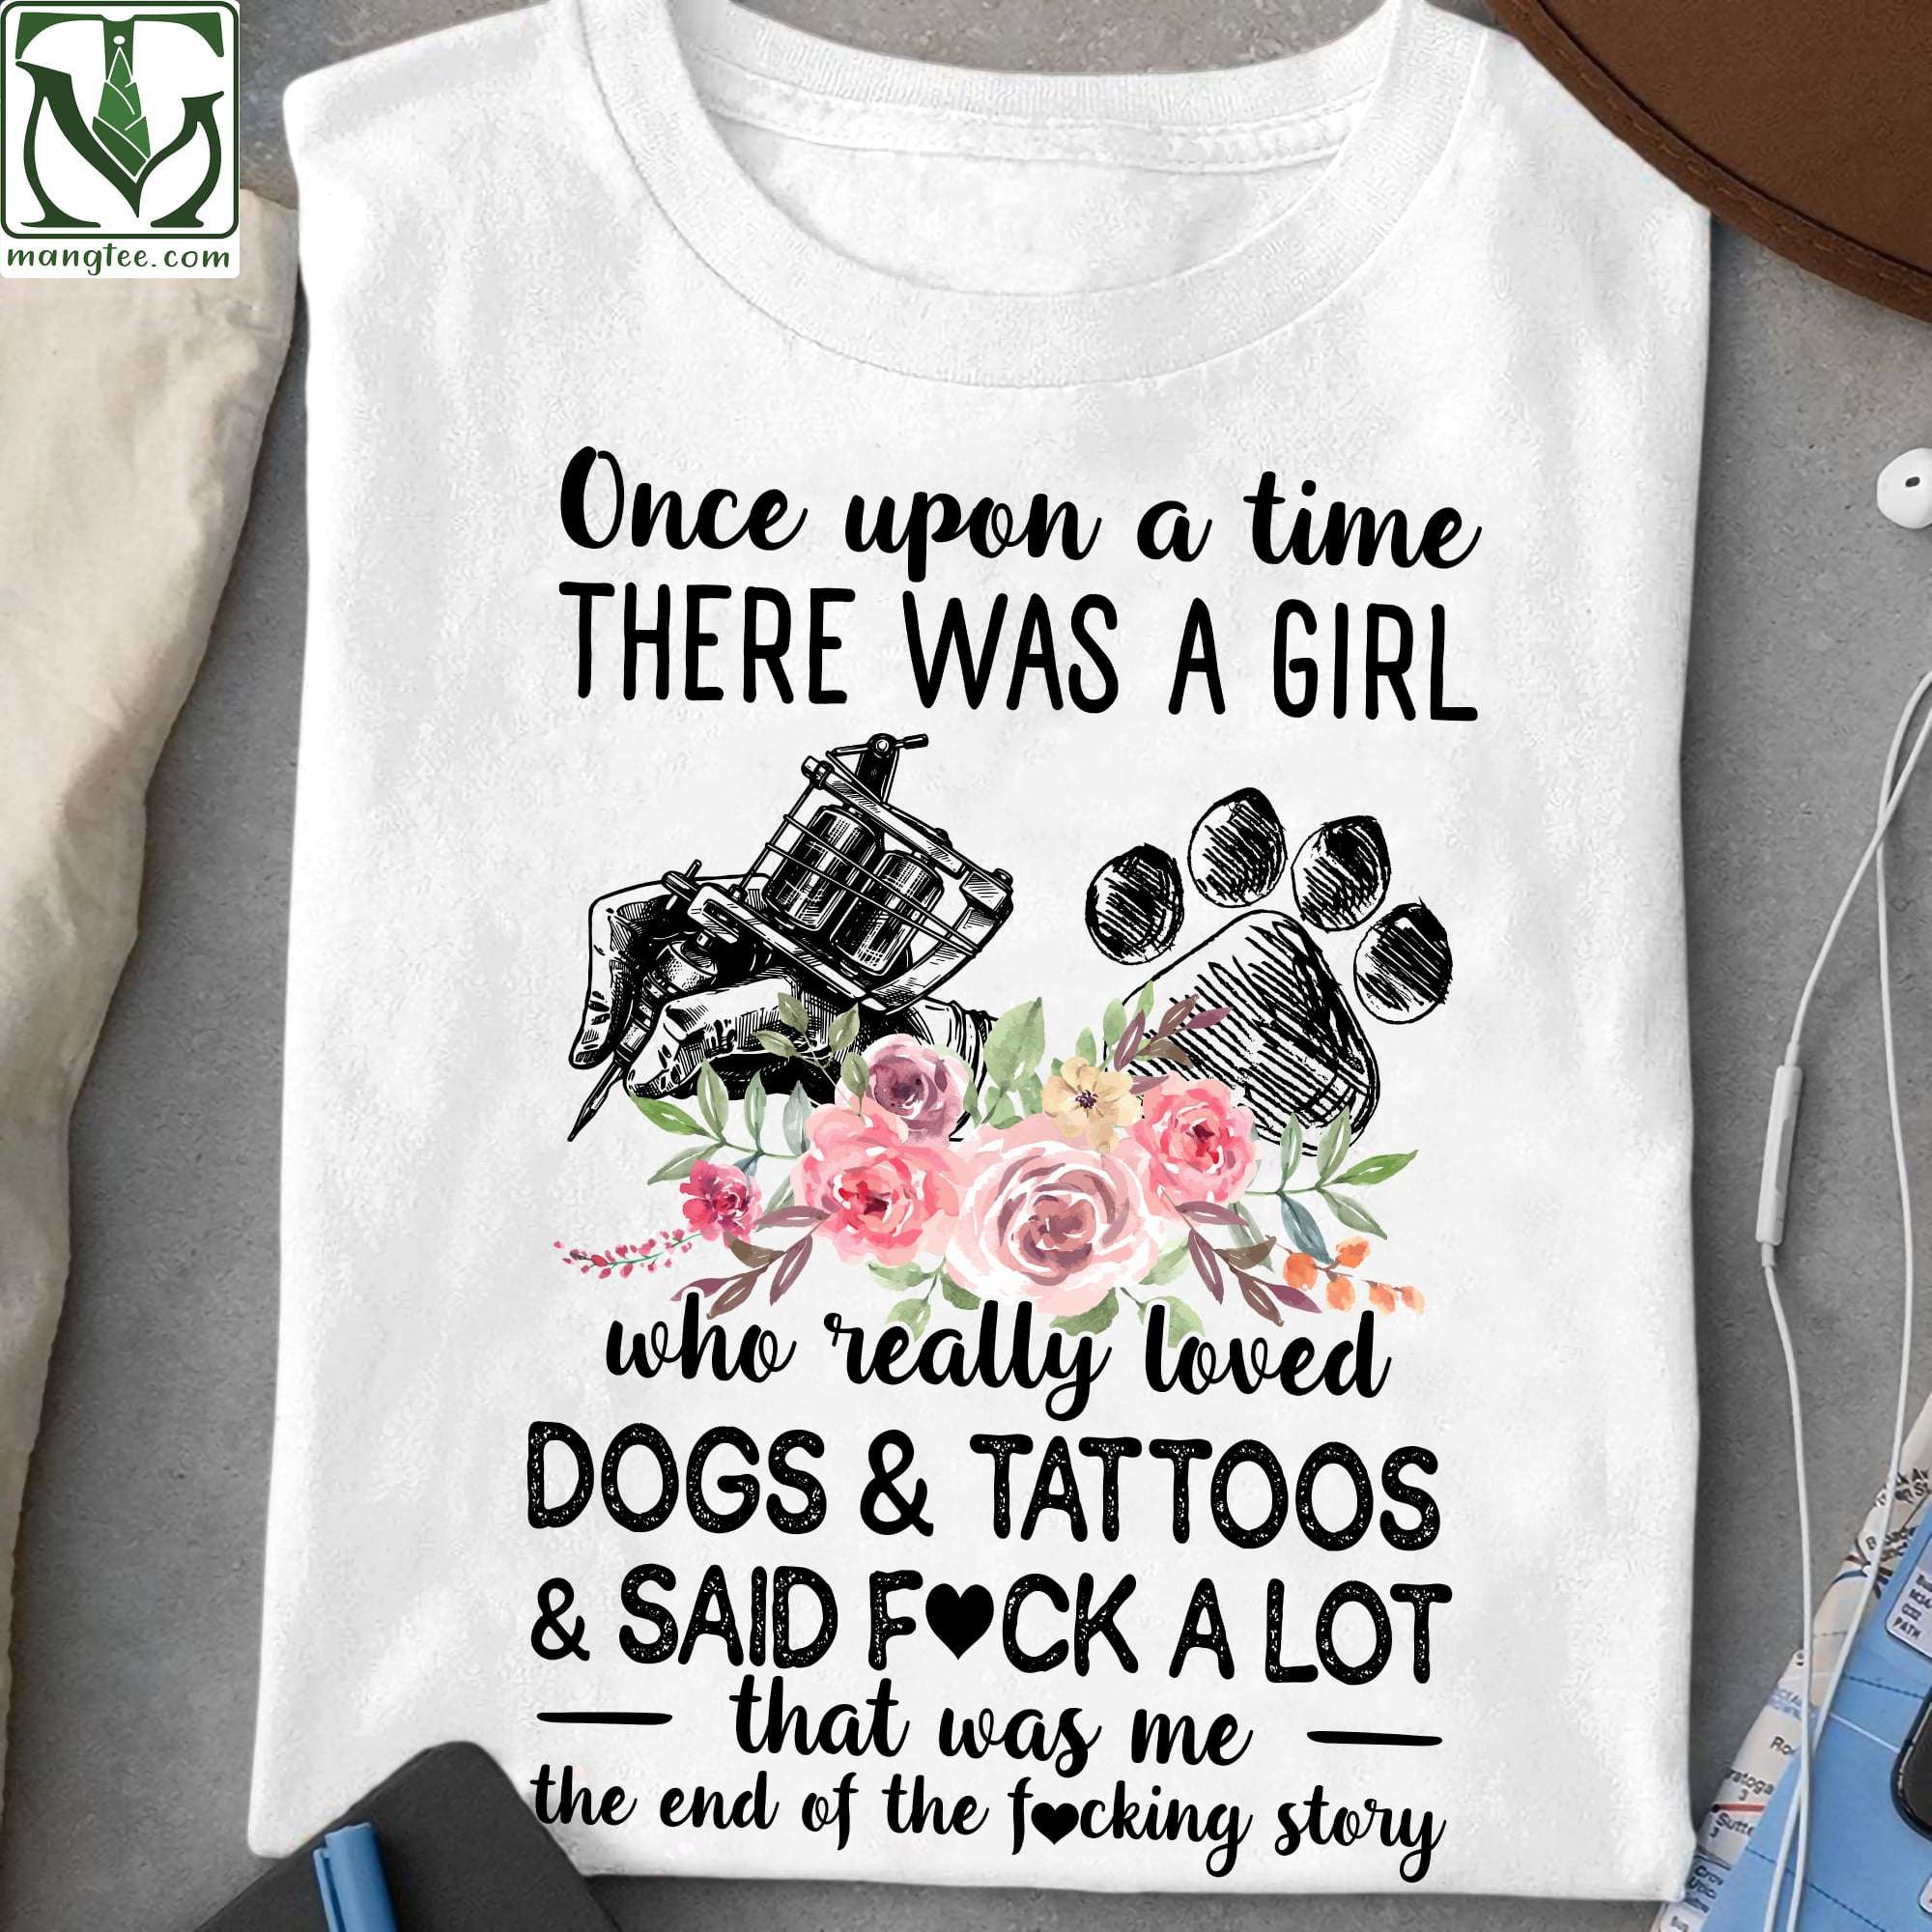 Tattoos Dogs - Once upon a time there was a girl who really loved dogs and tattoos and said fuck a lot that was me